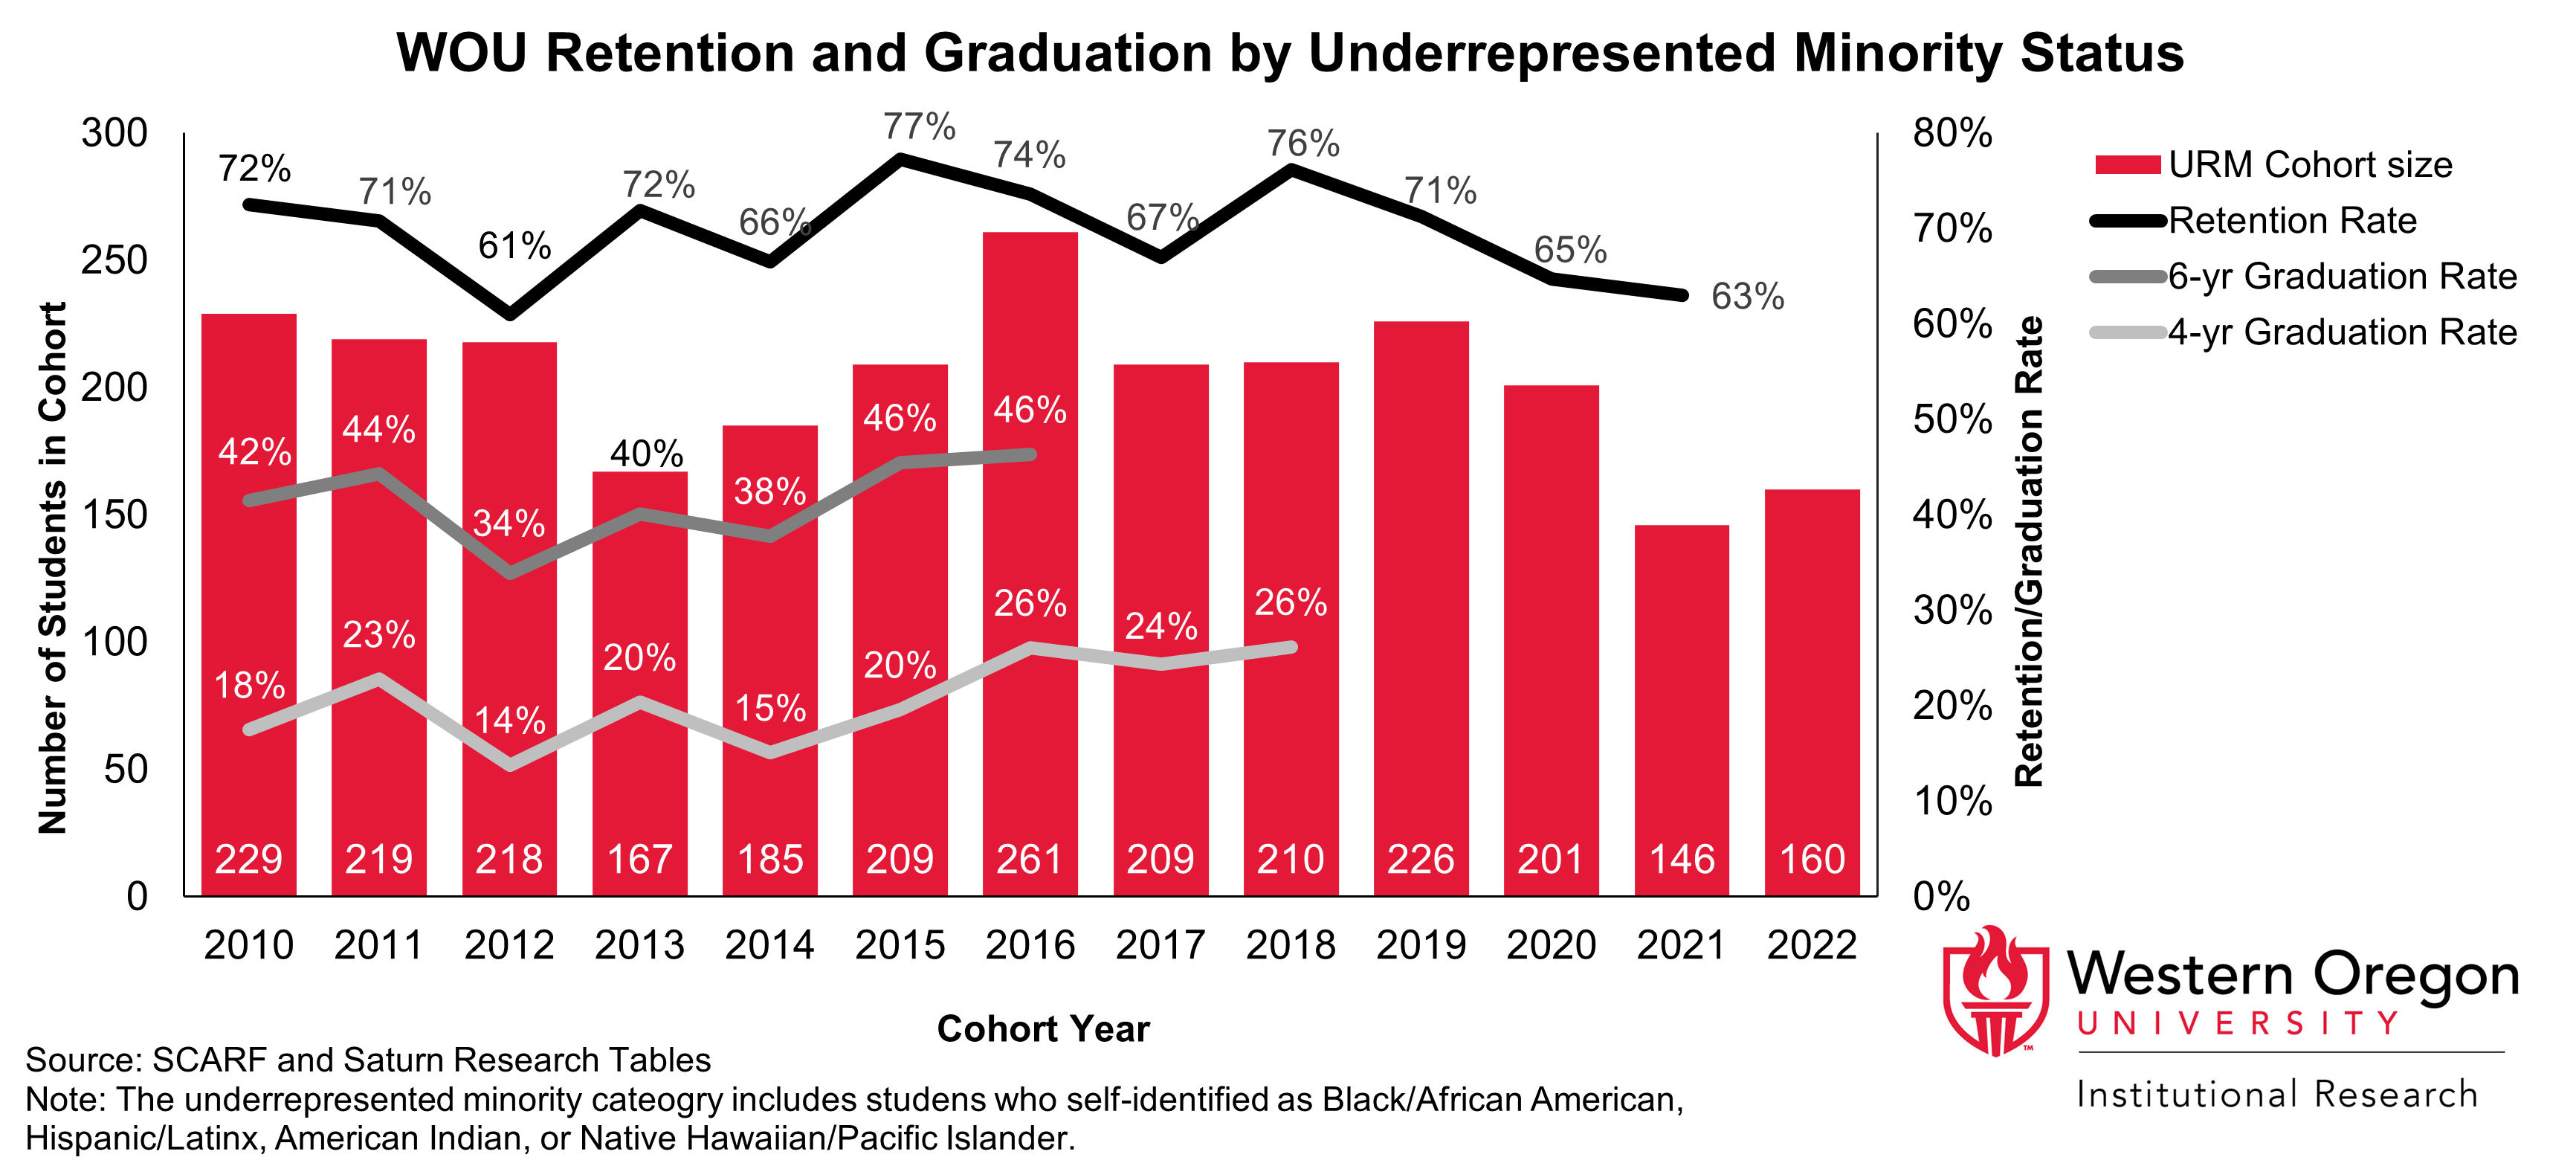 Bar and line graph of retention and 4- and 6-year graduation rates since 2010 for WOU students from underrepresented minority groups, showing that graduation rates have been steadily increasing while retention rates have remained largely stable